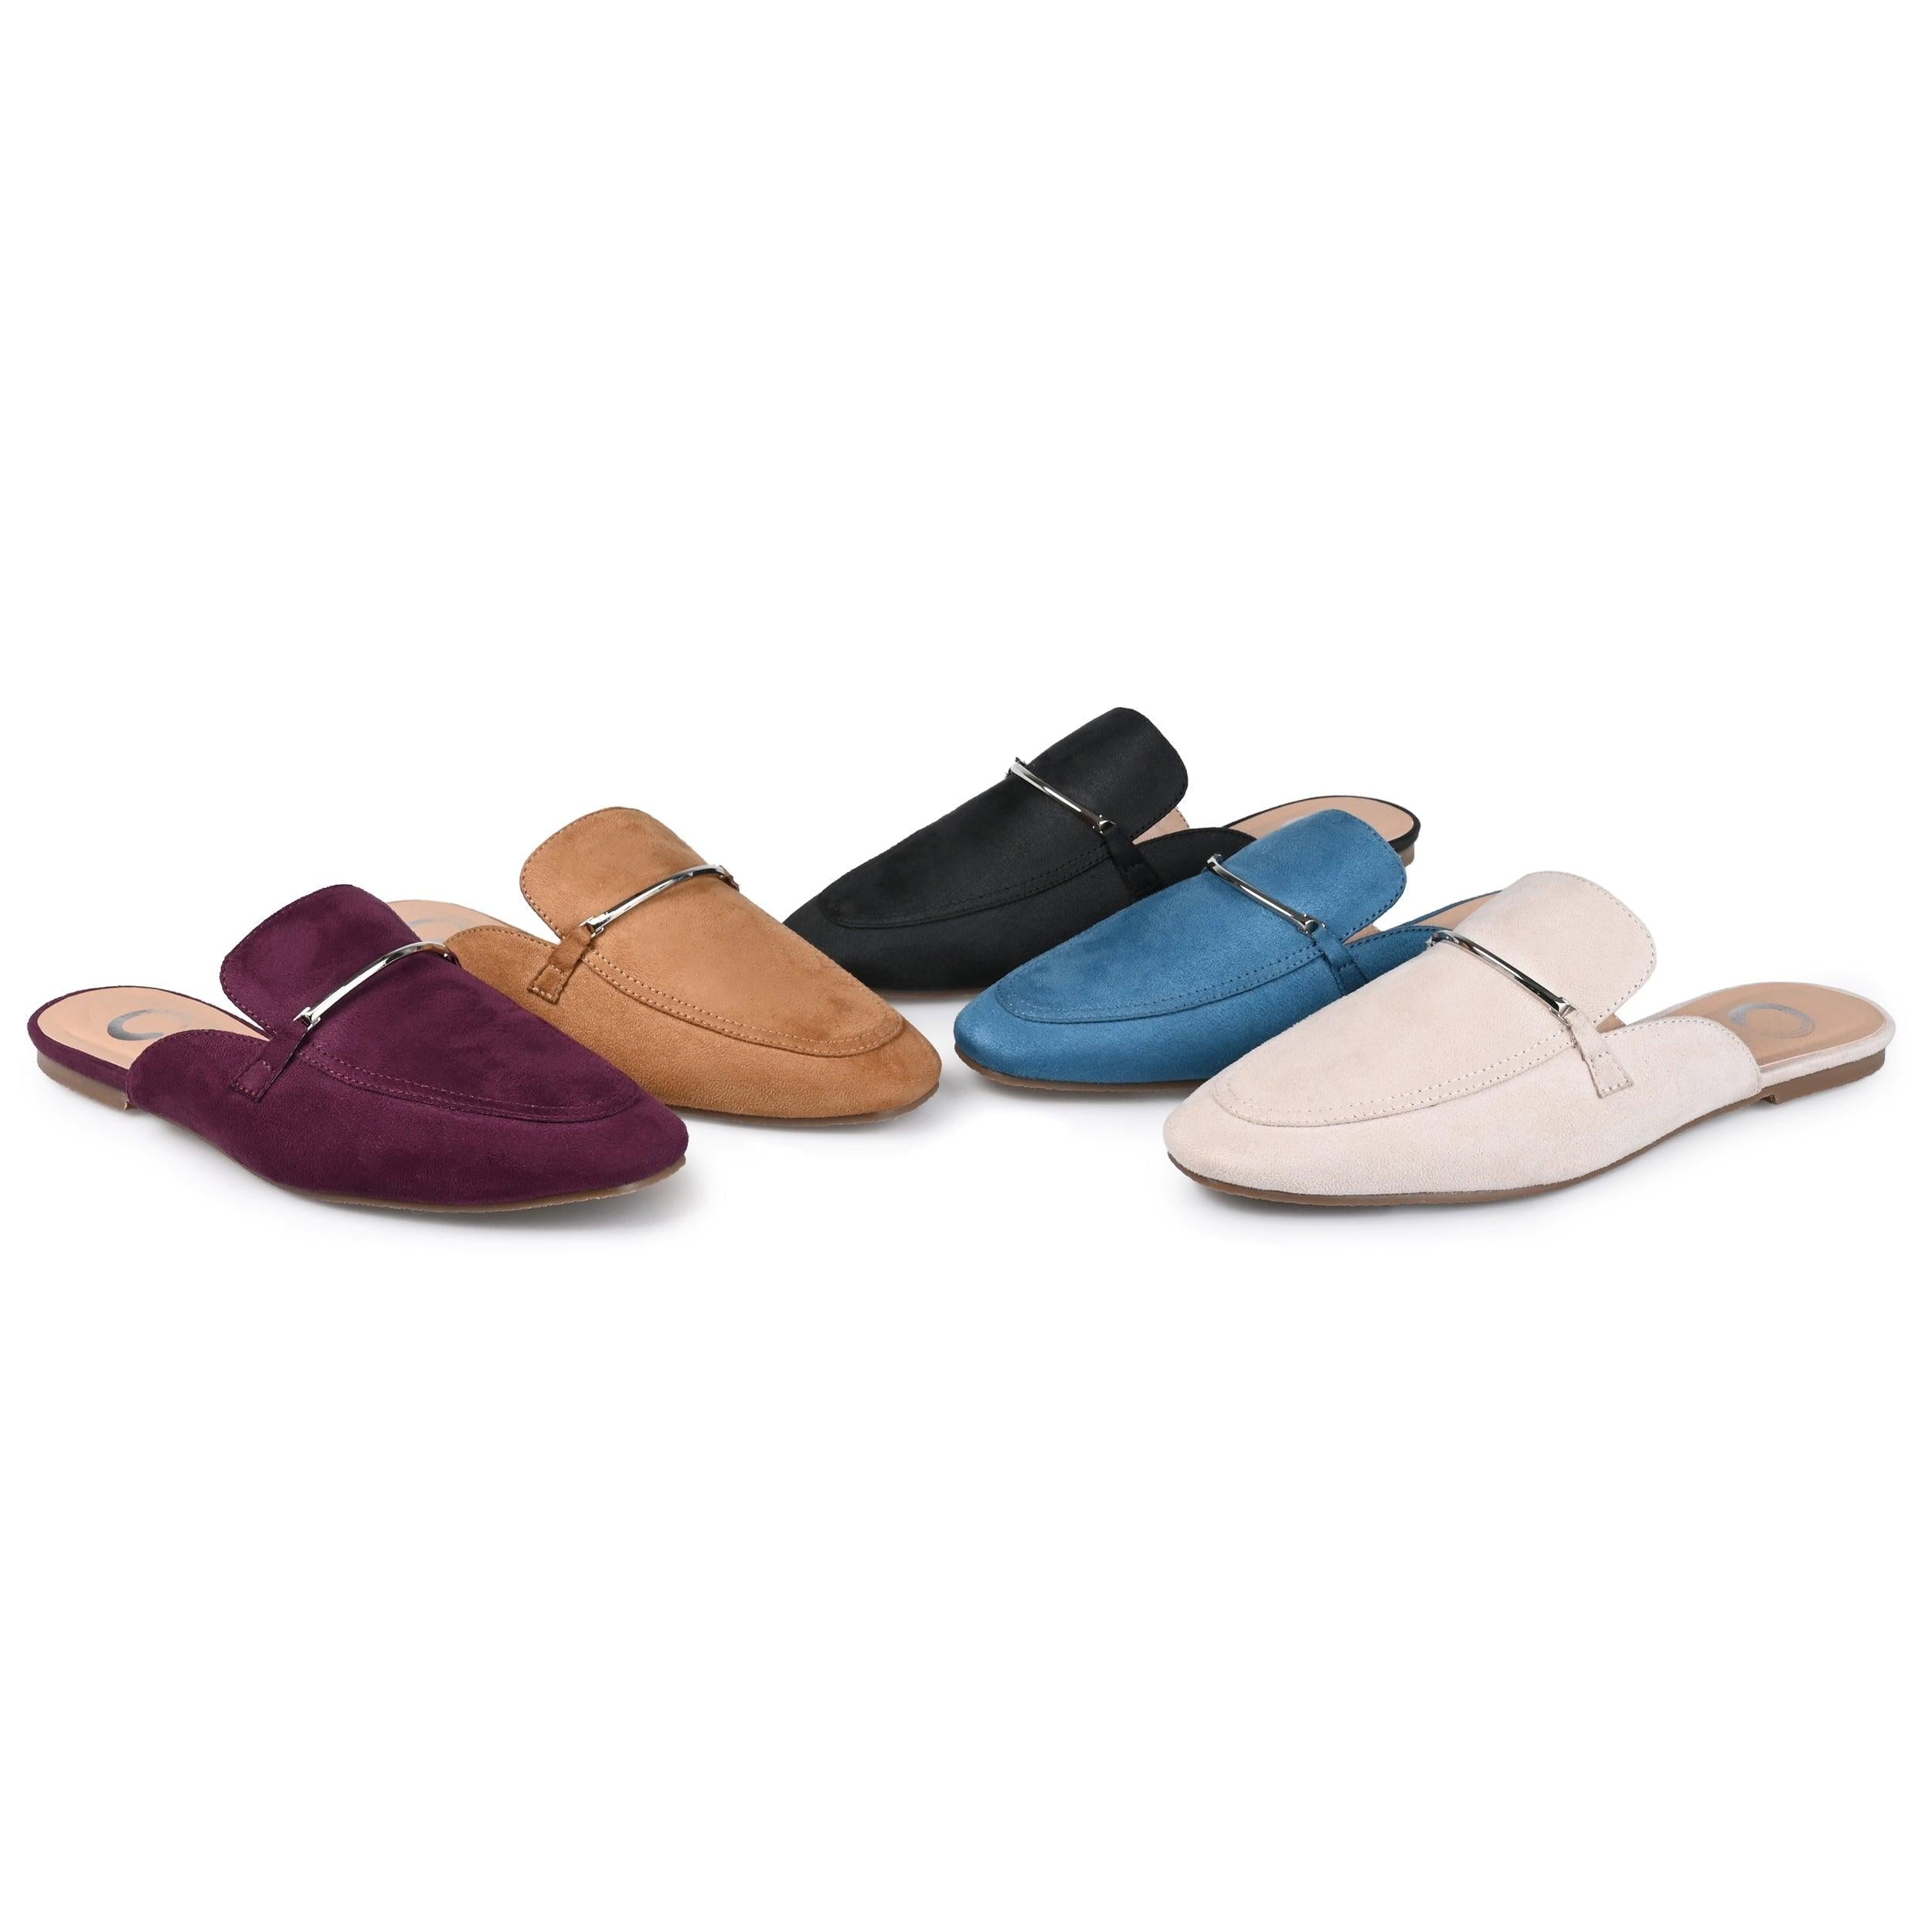 Journee Collection Ameena Mule - Free Shipping